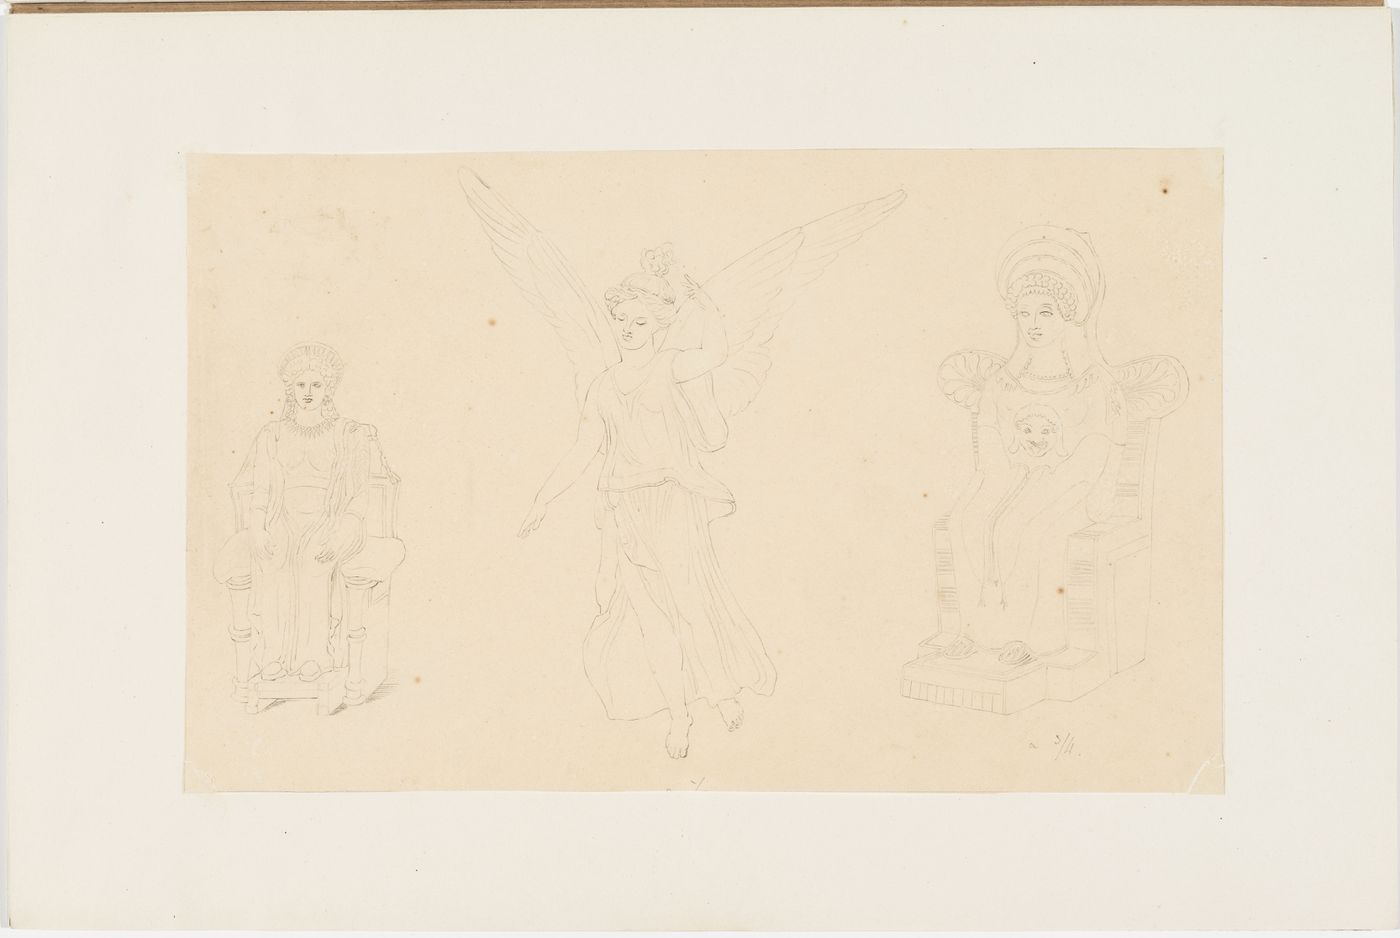 Two drawings of classical female statues seated on thrones, and one winged figure, possibly a Nike or messenger